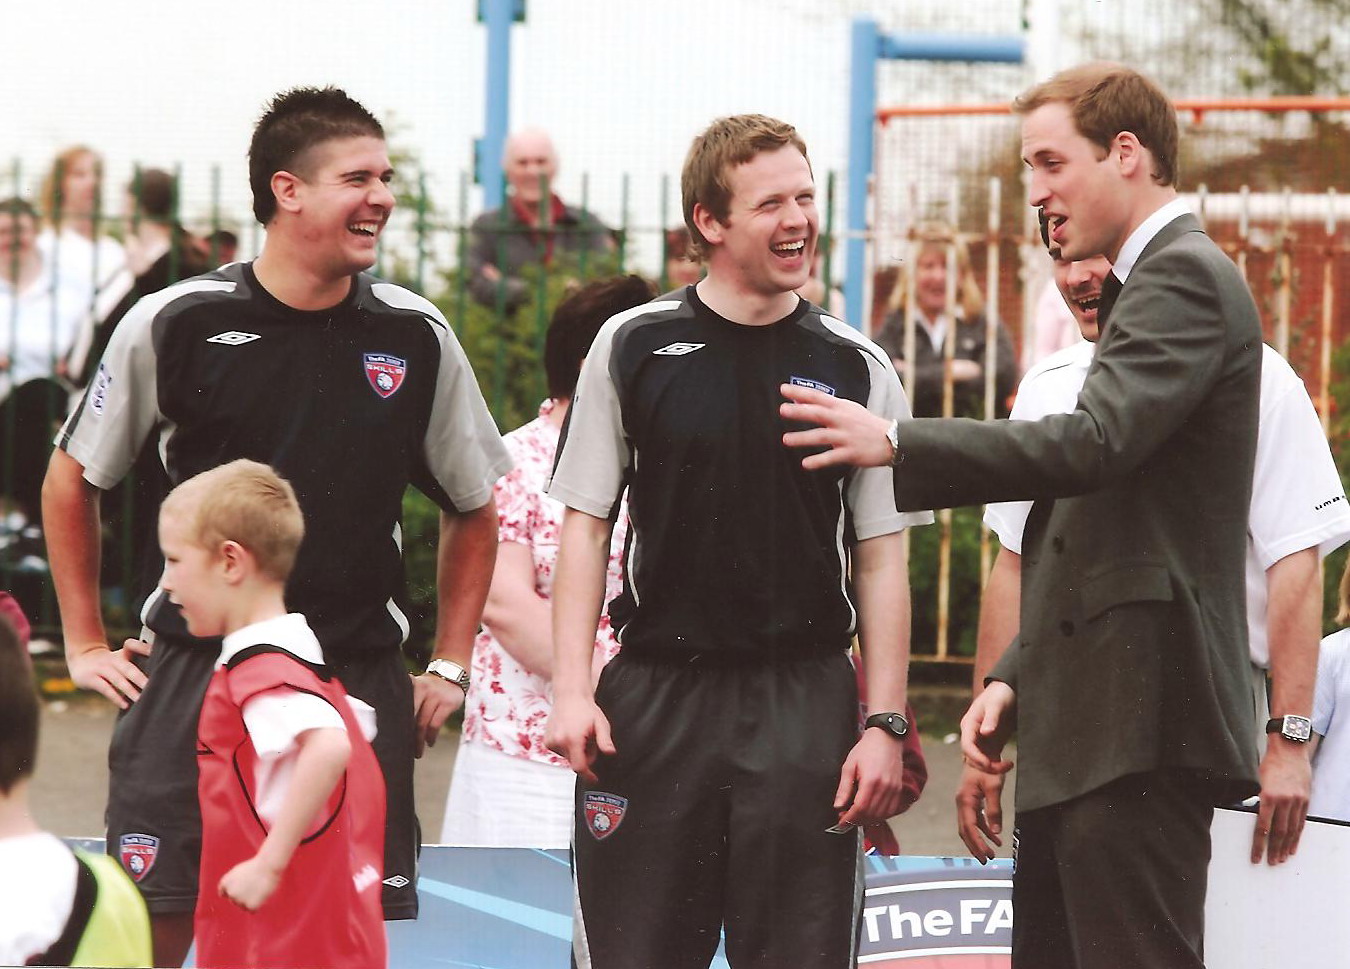 photo Paul-with-HRH-laughing.jpg